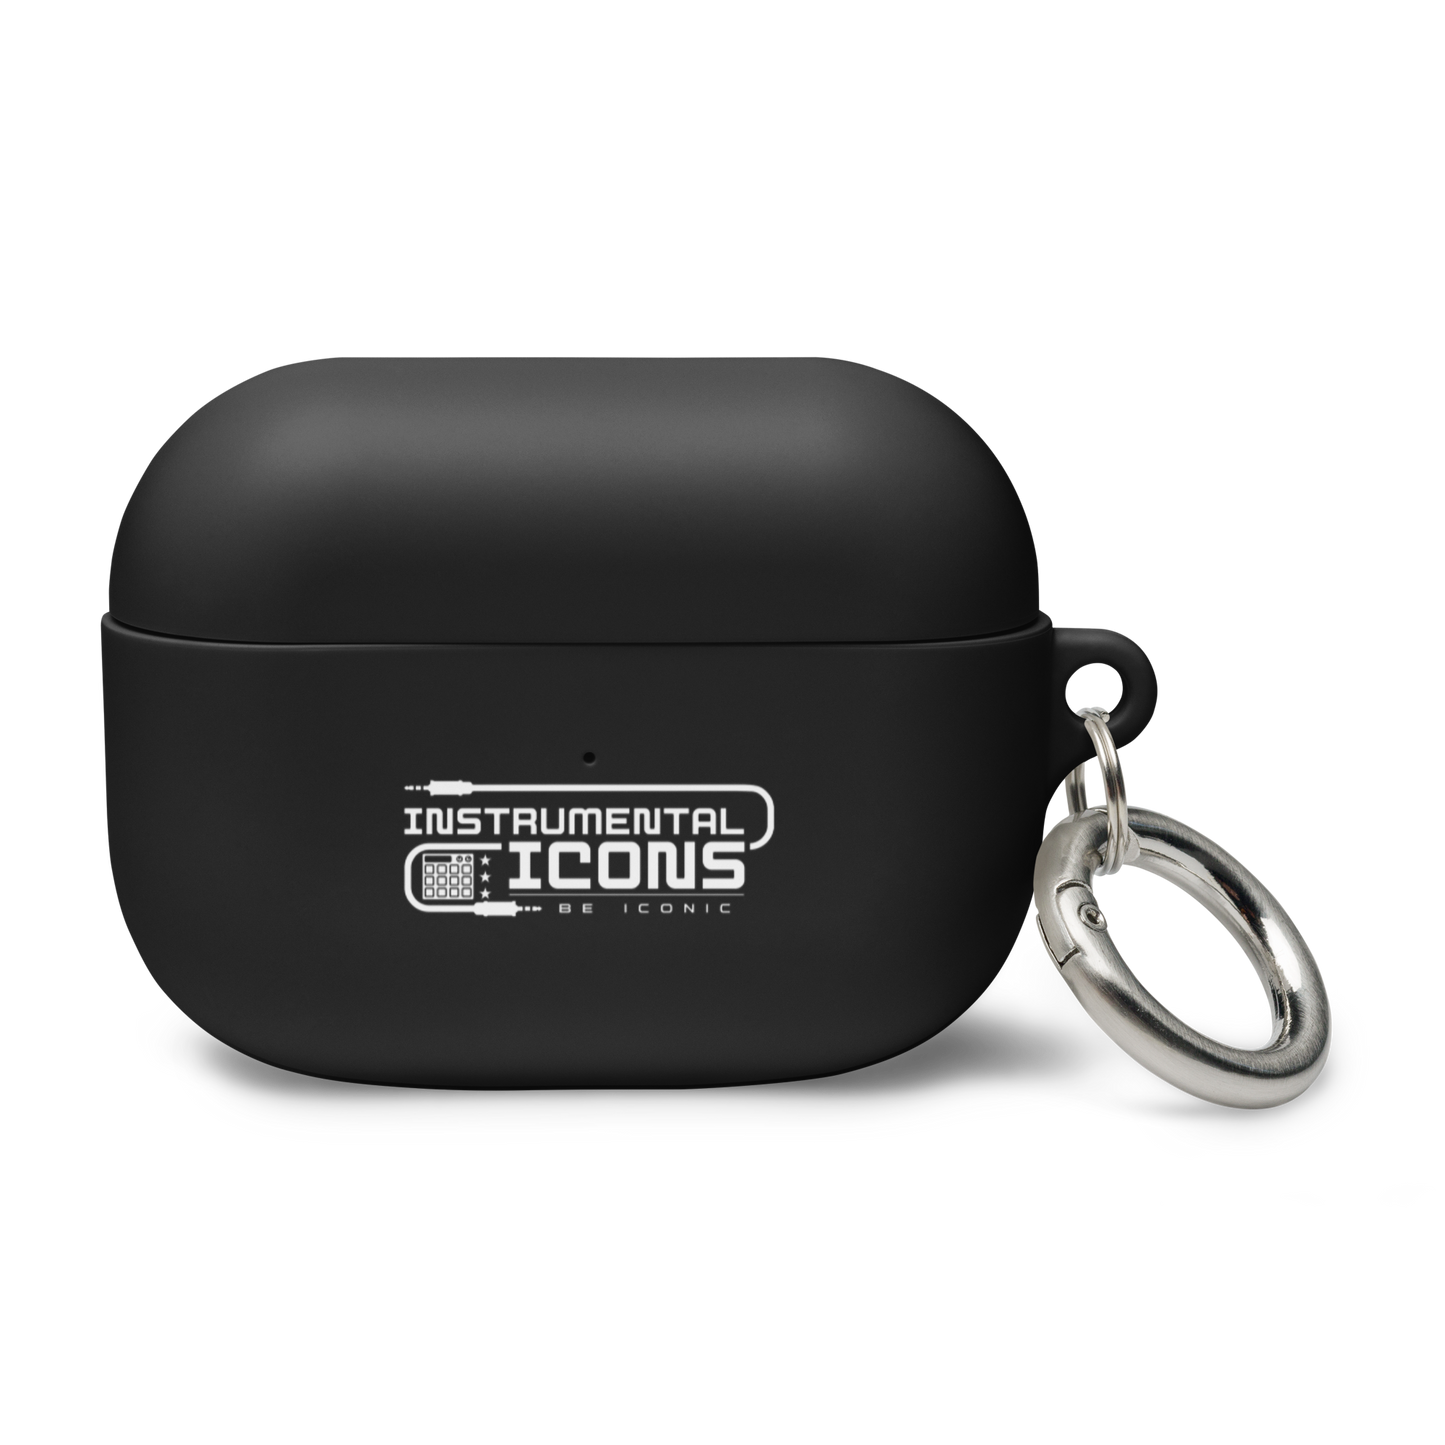 "INSTRUMENTAL ICONS" Rubber Case for AirPods®